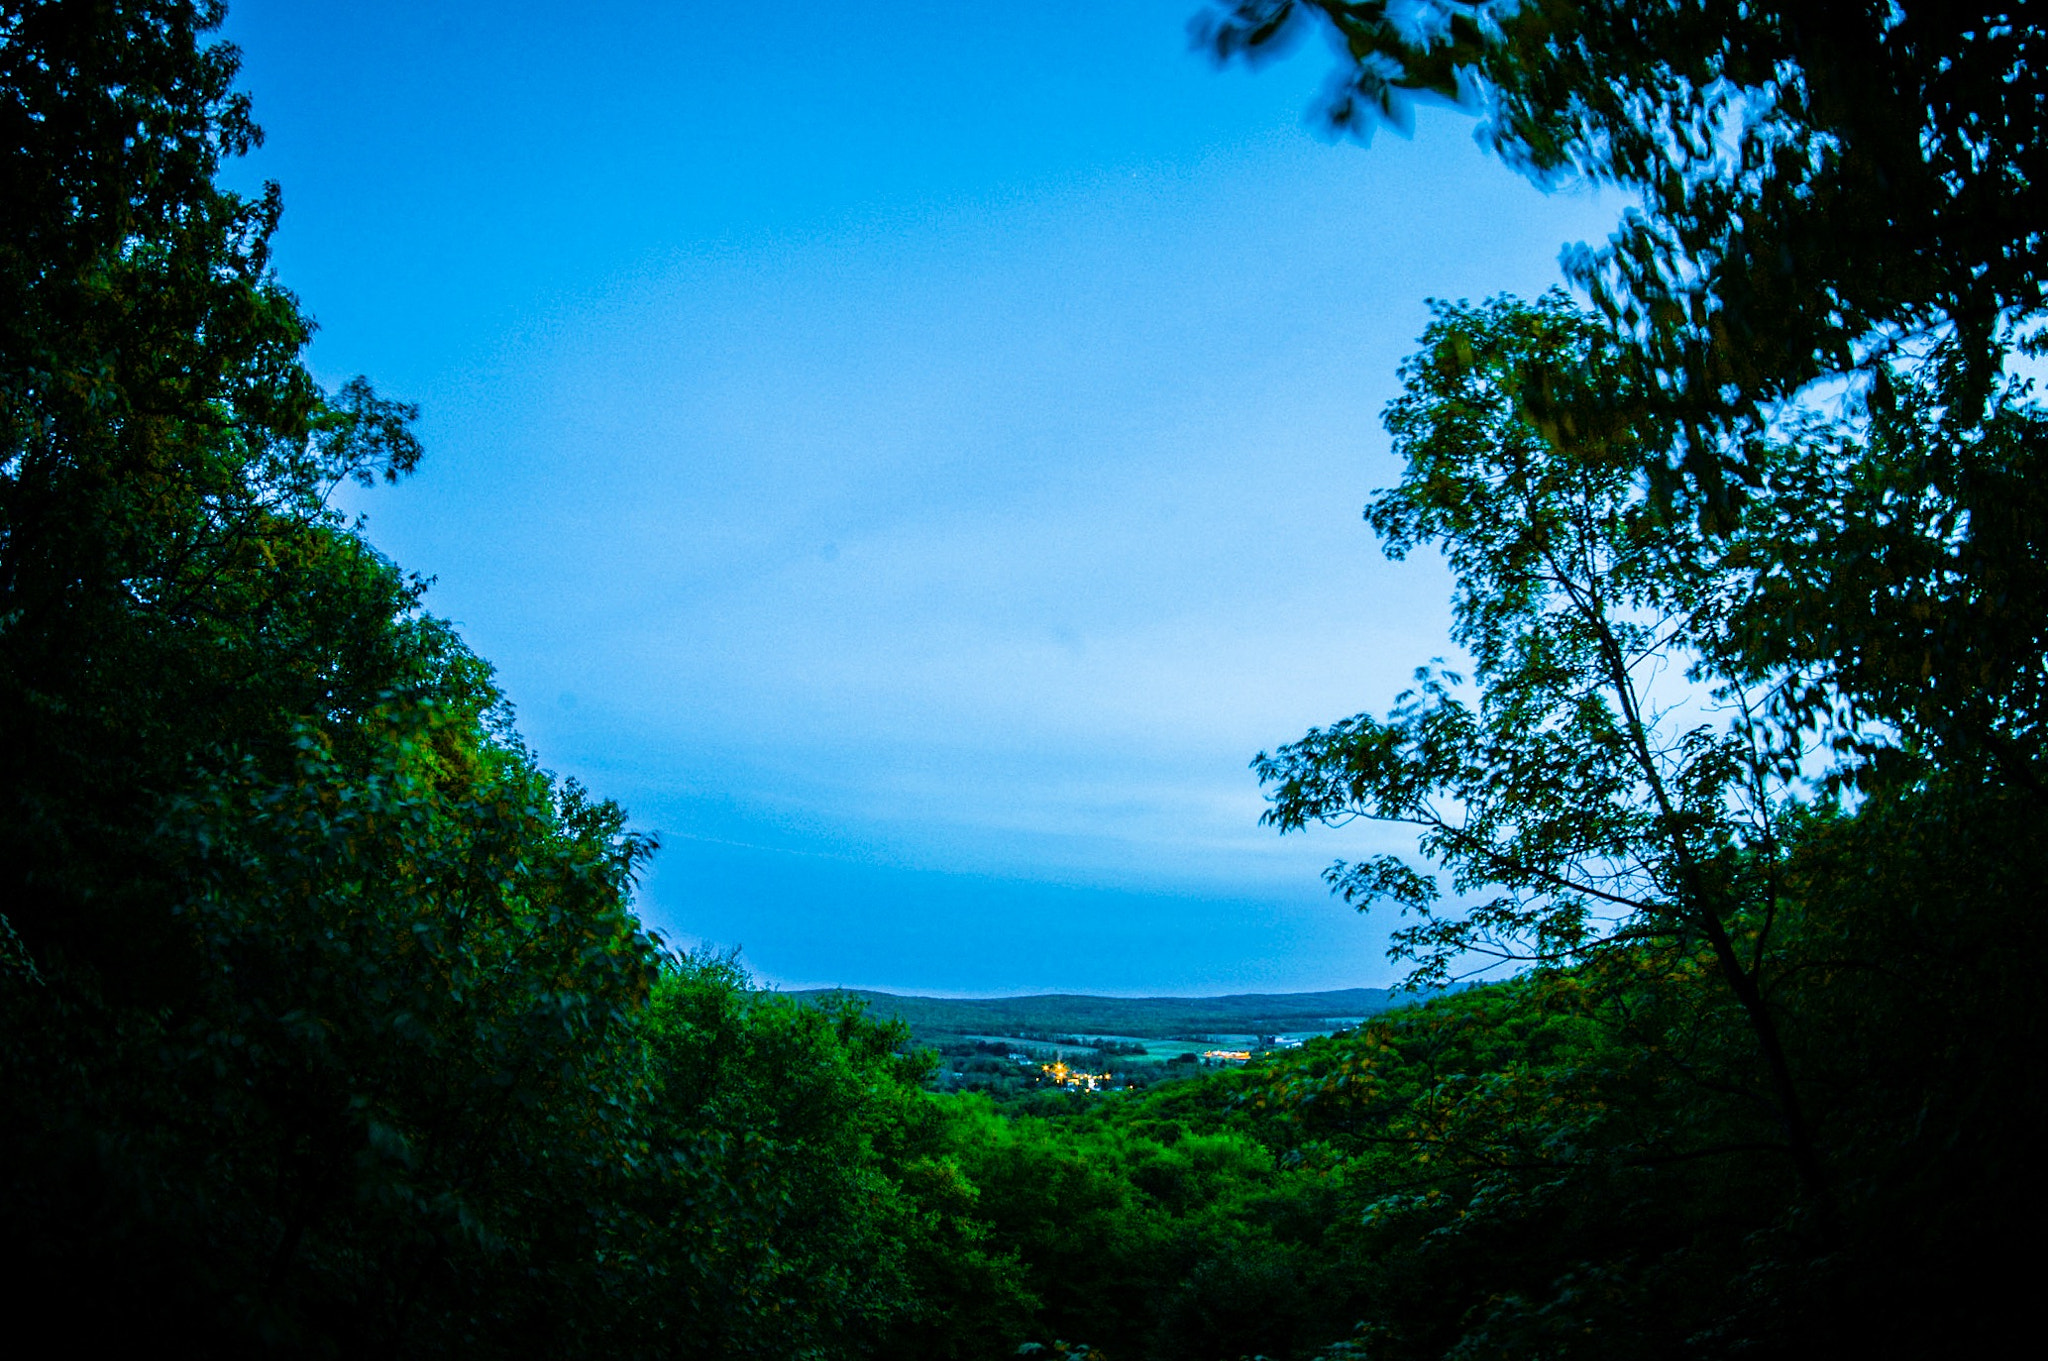 Nikon D3200 + Samyang 8mm F3.5 Aspherical IF MC Fisheye sample photo. Taken at around 8:52pm on may 20th at schooleys mountain park in long valley, new jersey photography